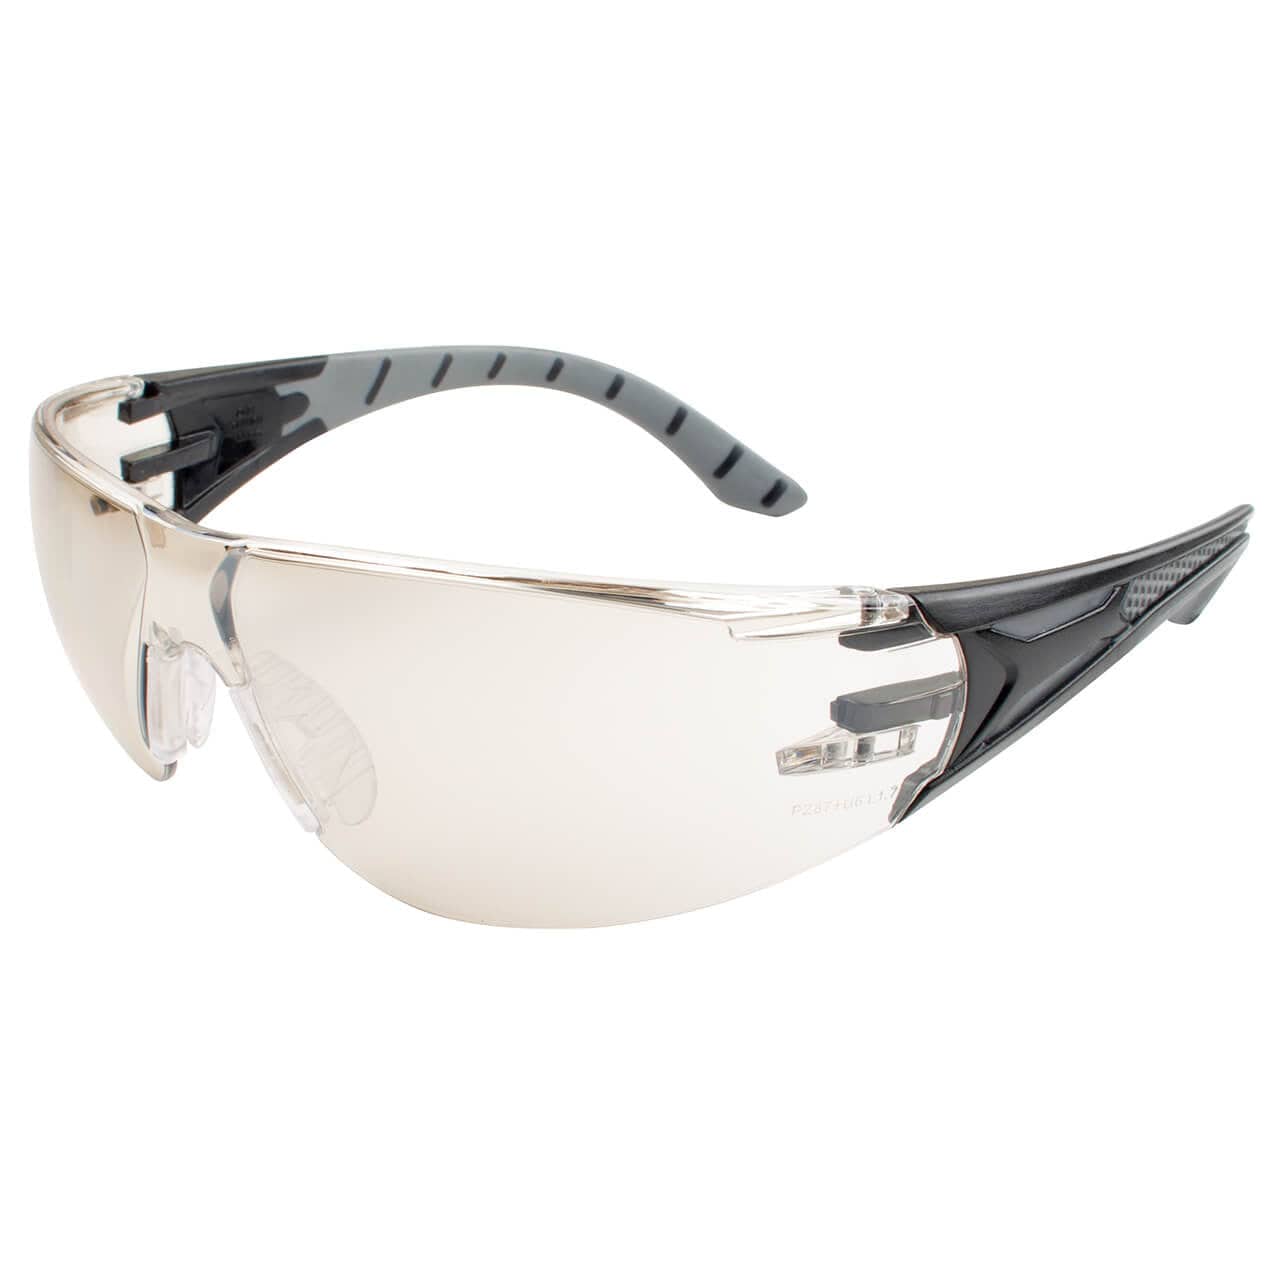 Chief Miller Protective Eyewear METEL M50 Safety Glasses Lightweight, Flexible Temples, Soft Nose, Multiple Lens Options Apparel